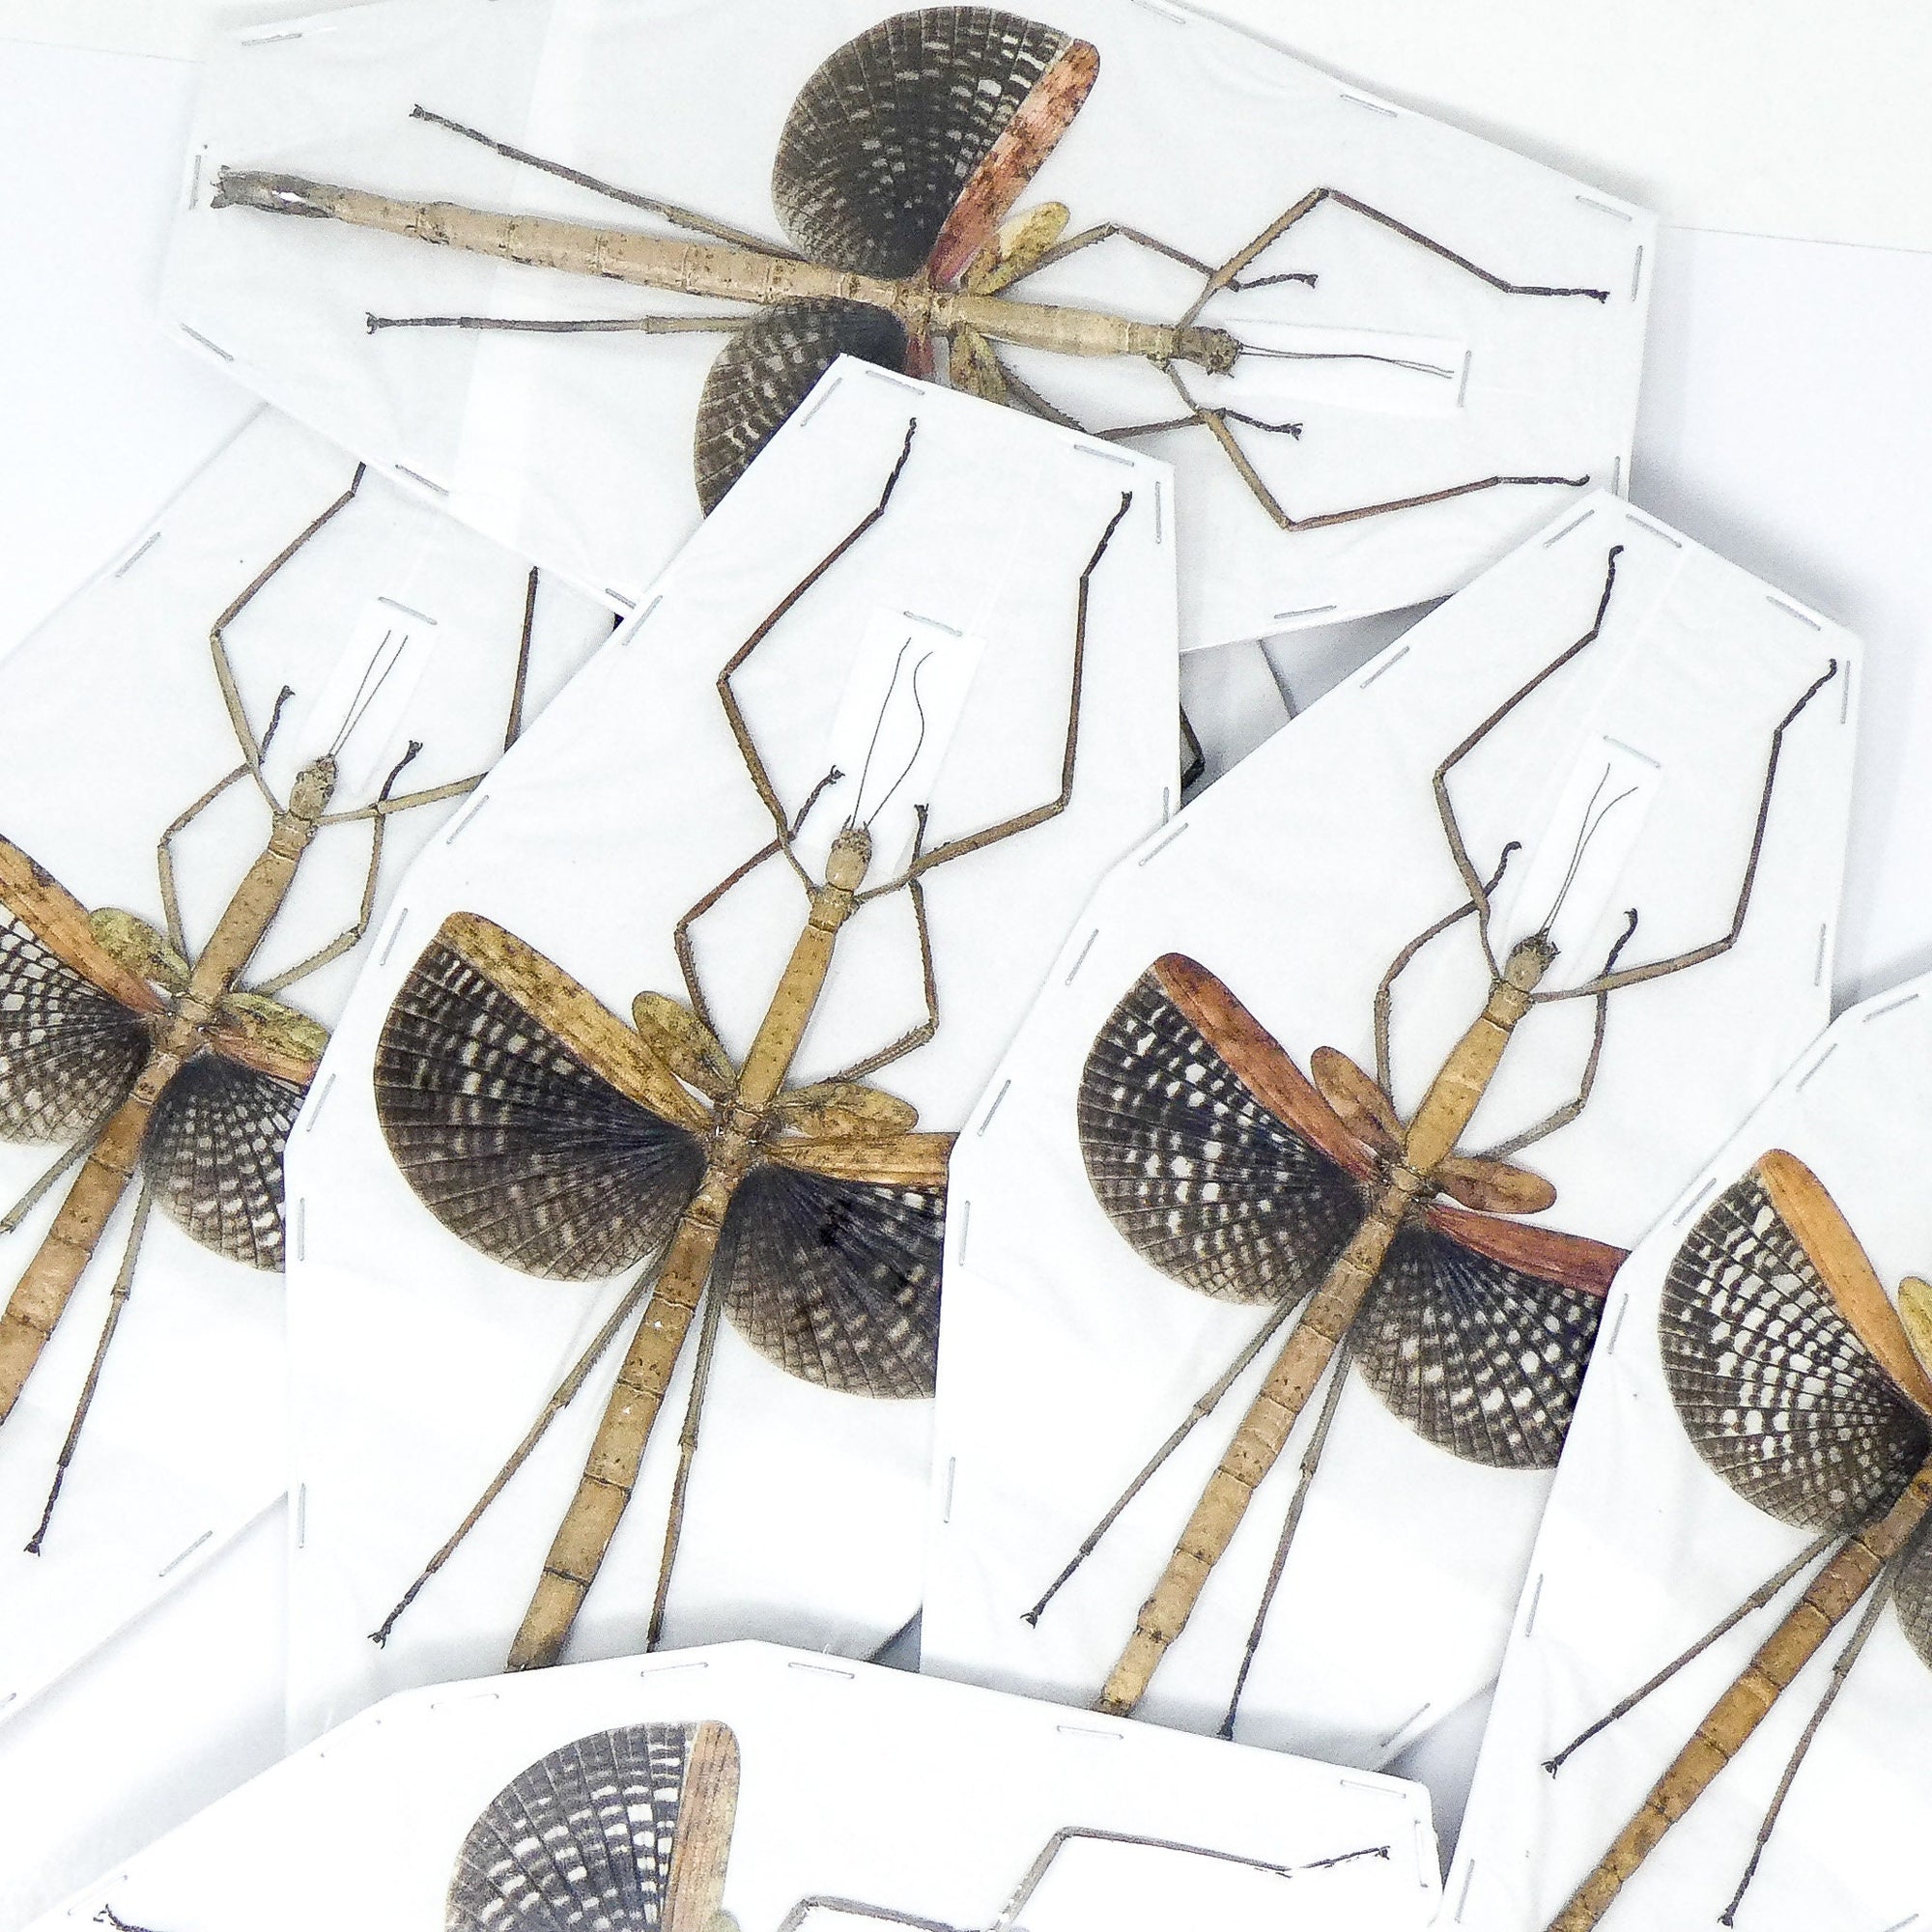 Pack of 10 Buru Giant Stick Insect (Anchiale buruense) 17cm+ A1 Real Entomology Taxidermy Specimen from Indonesia